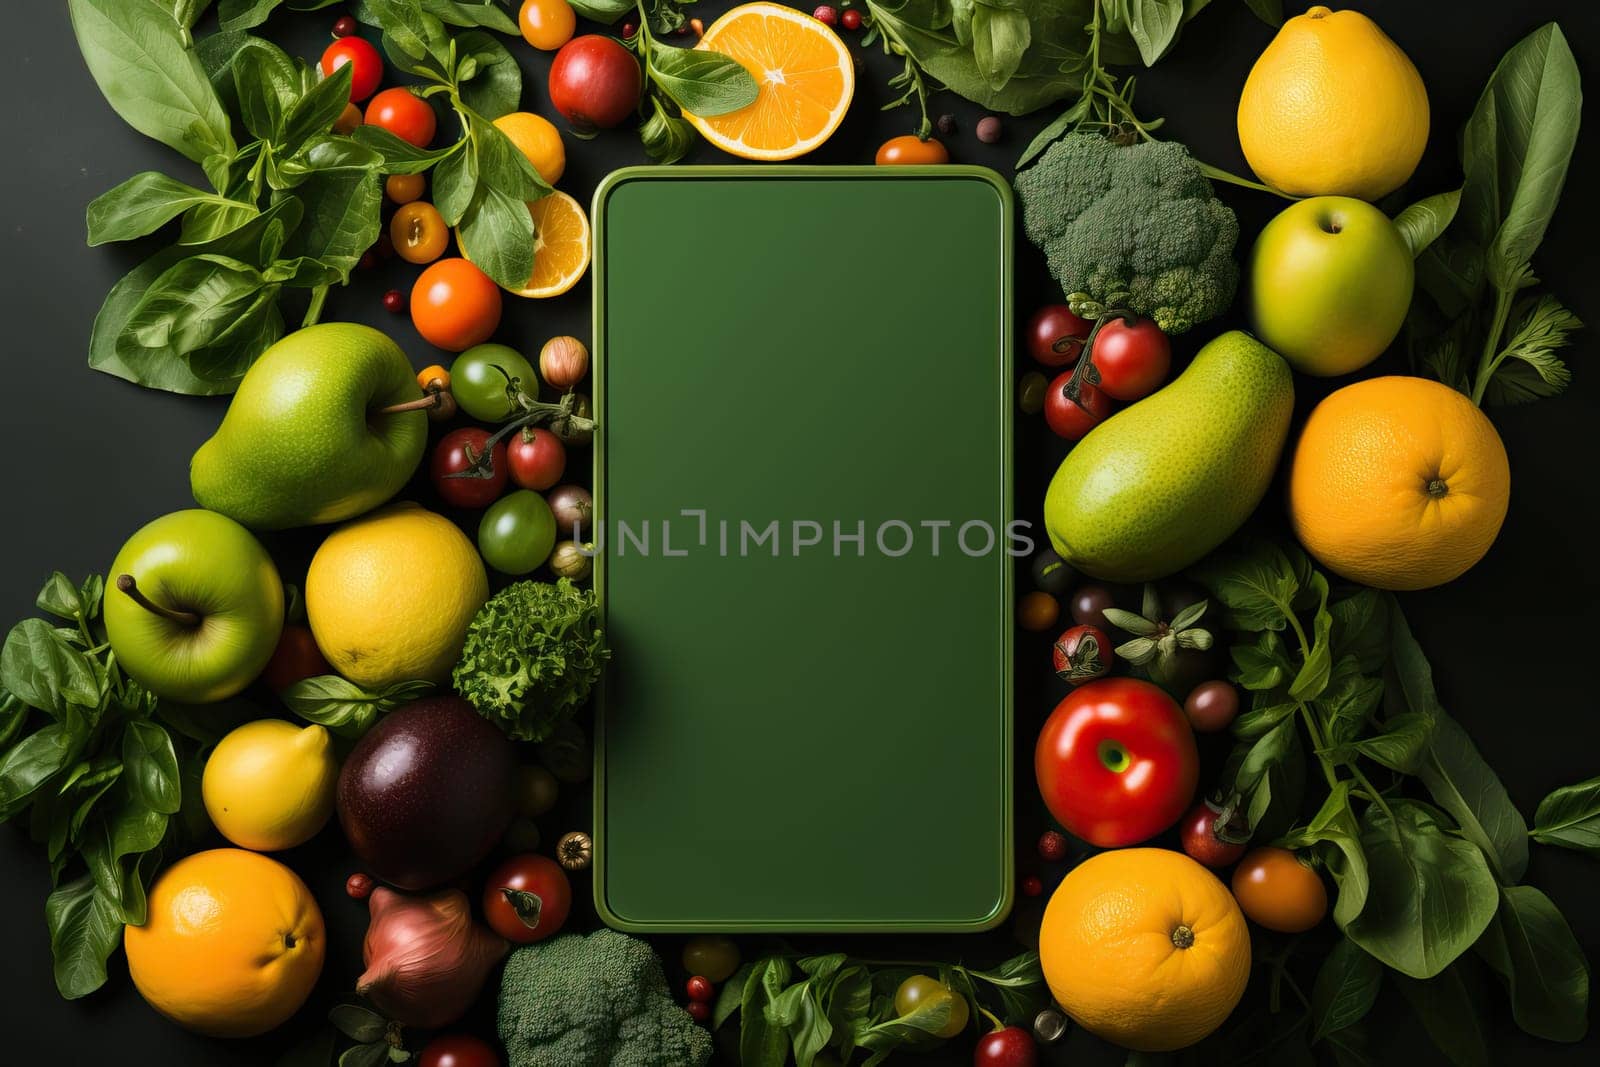 Smartphone with blank screen and fresh food, online food shopping app, fruit diet concept with phone.